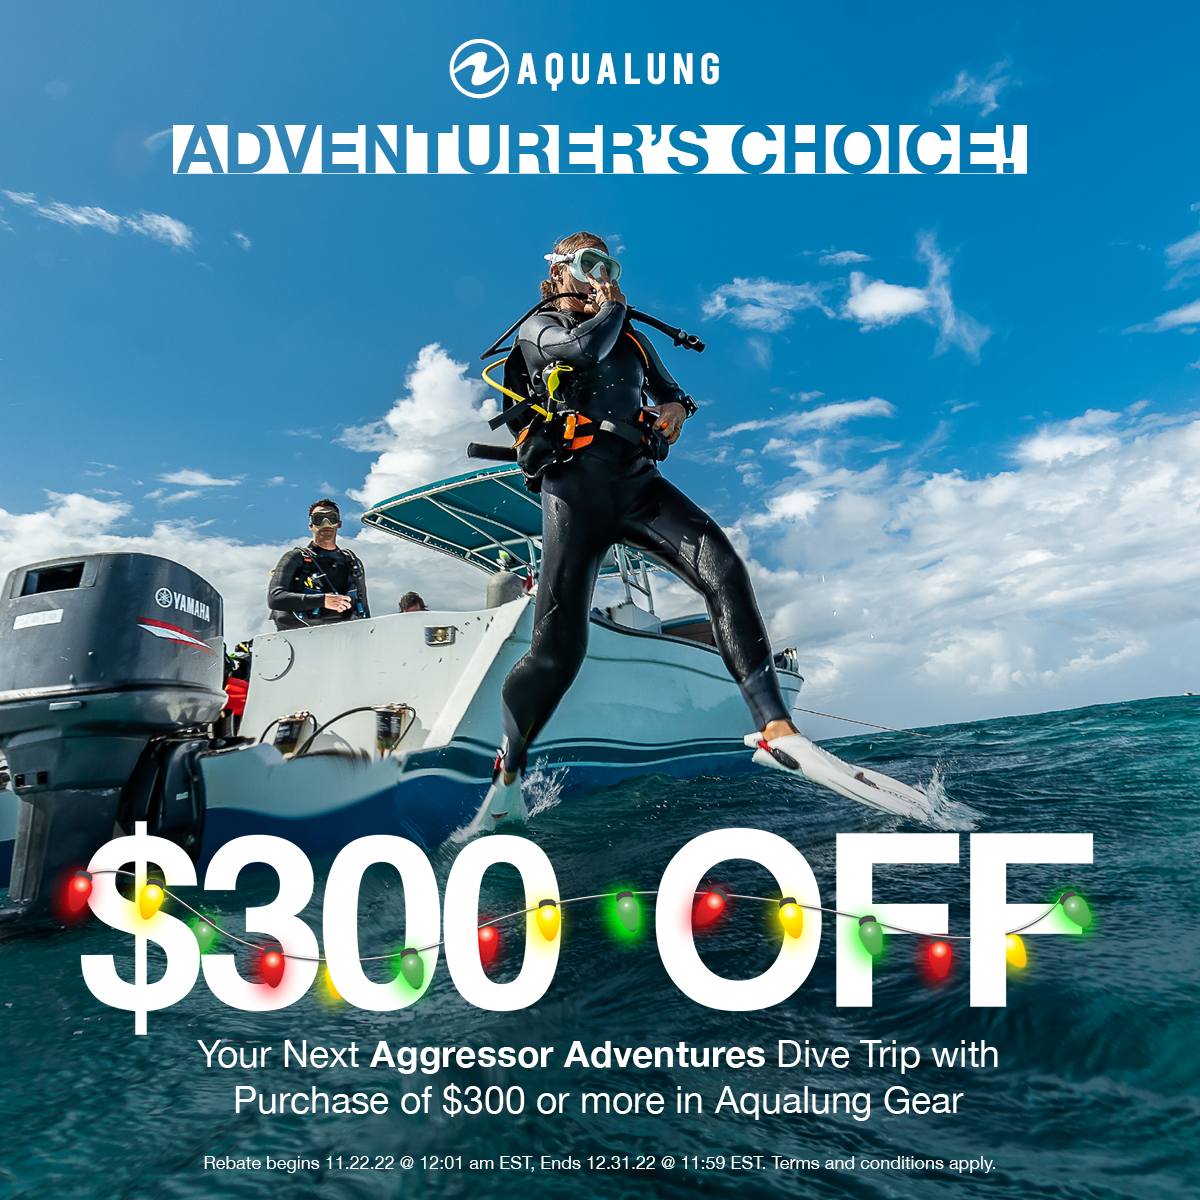 Earn a $300 voucher with Aggressor with your $300 Aqua Lung purchase